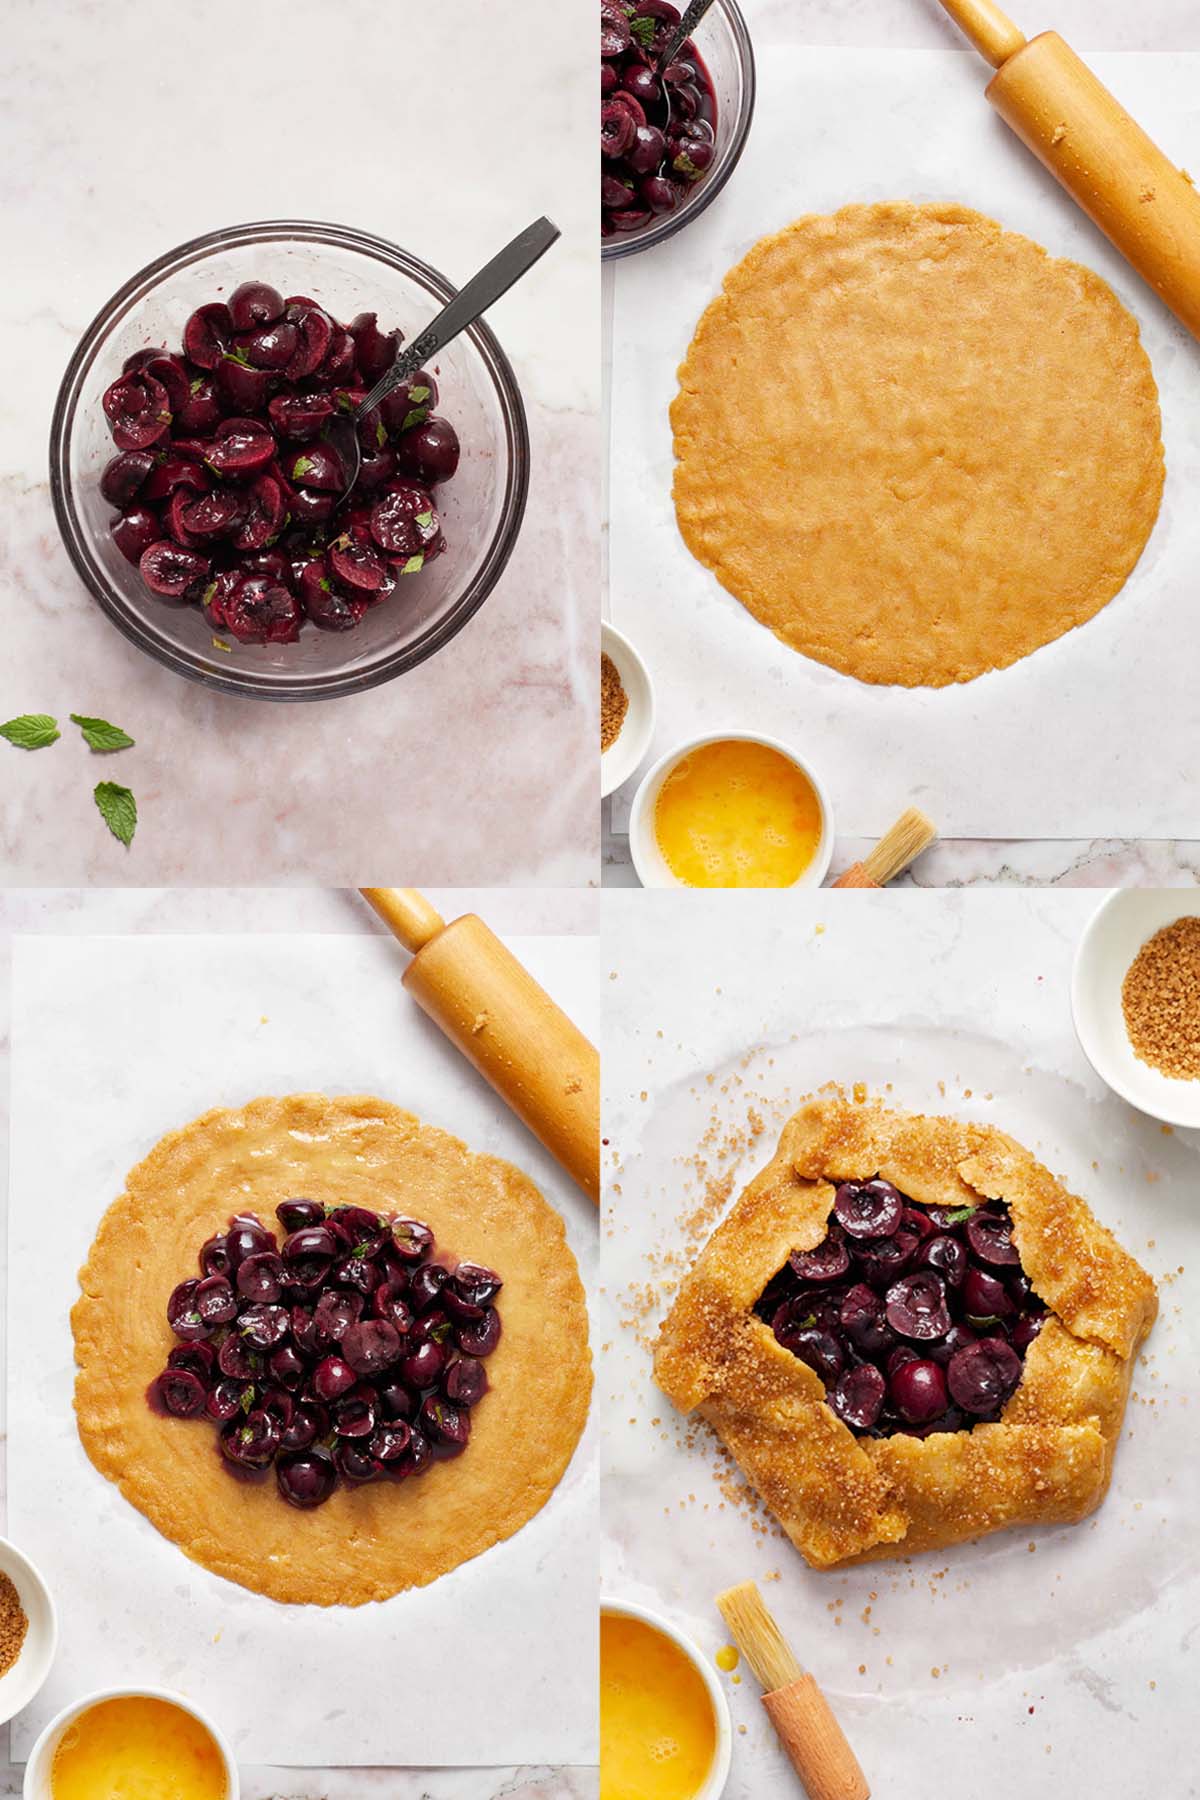 Collage of 4 images showing how the cherry galette is assembled.